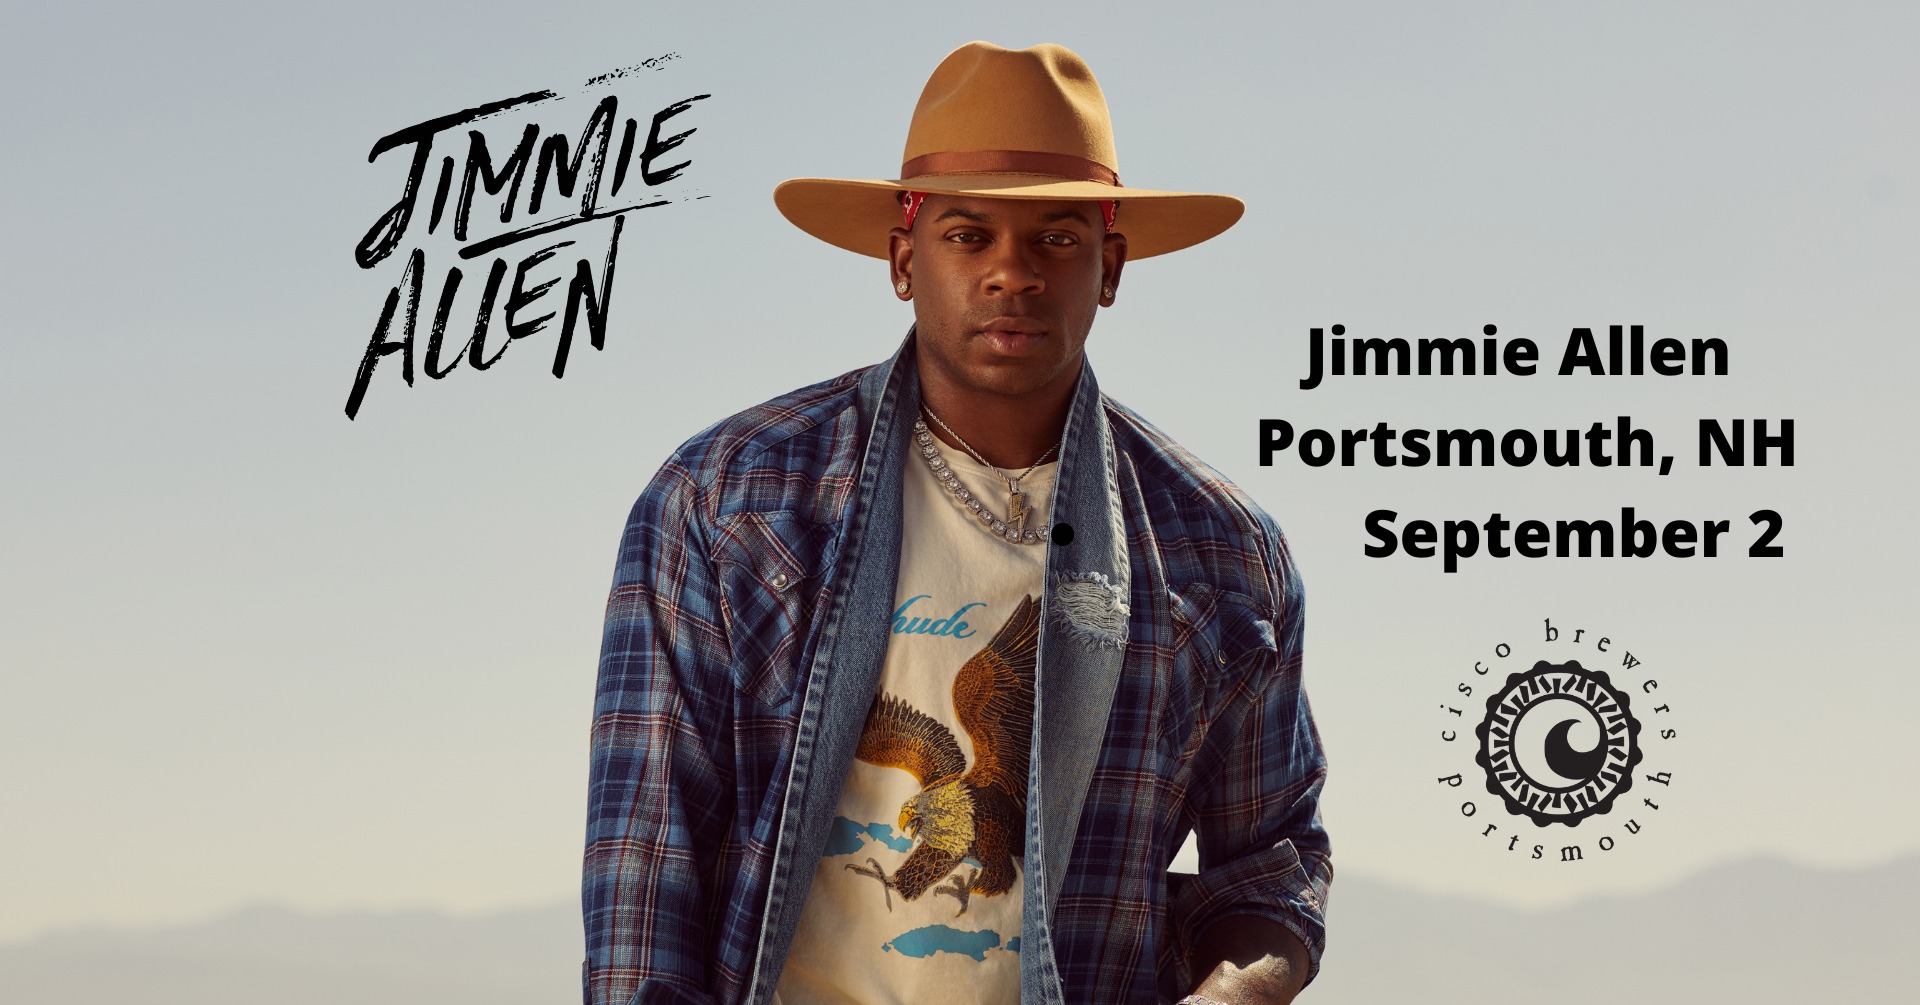 Win Tickets to See Jimmie Allen in Portsmouth